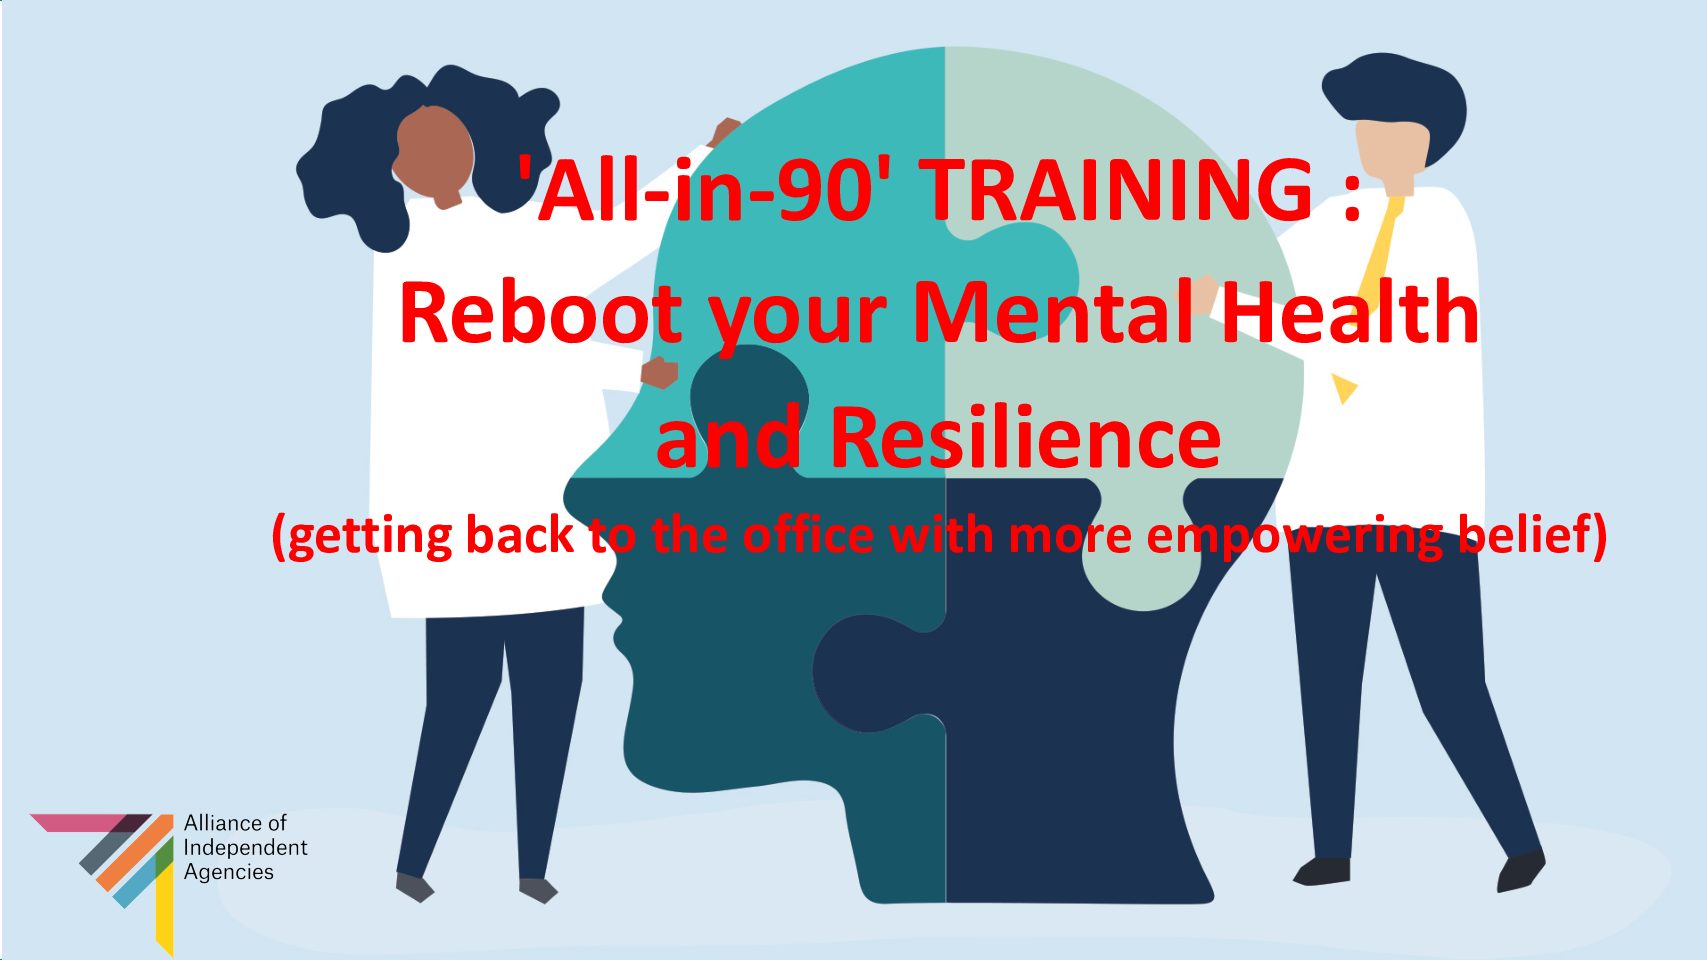 'All-in-90' TRAINING : Reboot your Mental Health and Resilience (getting back to the office with more empowering belief)